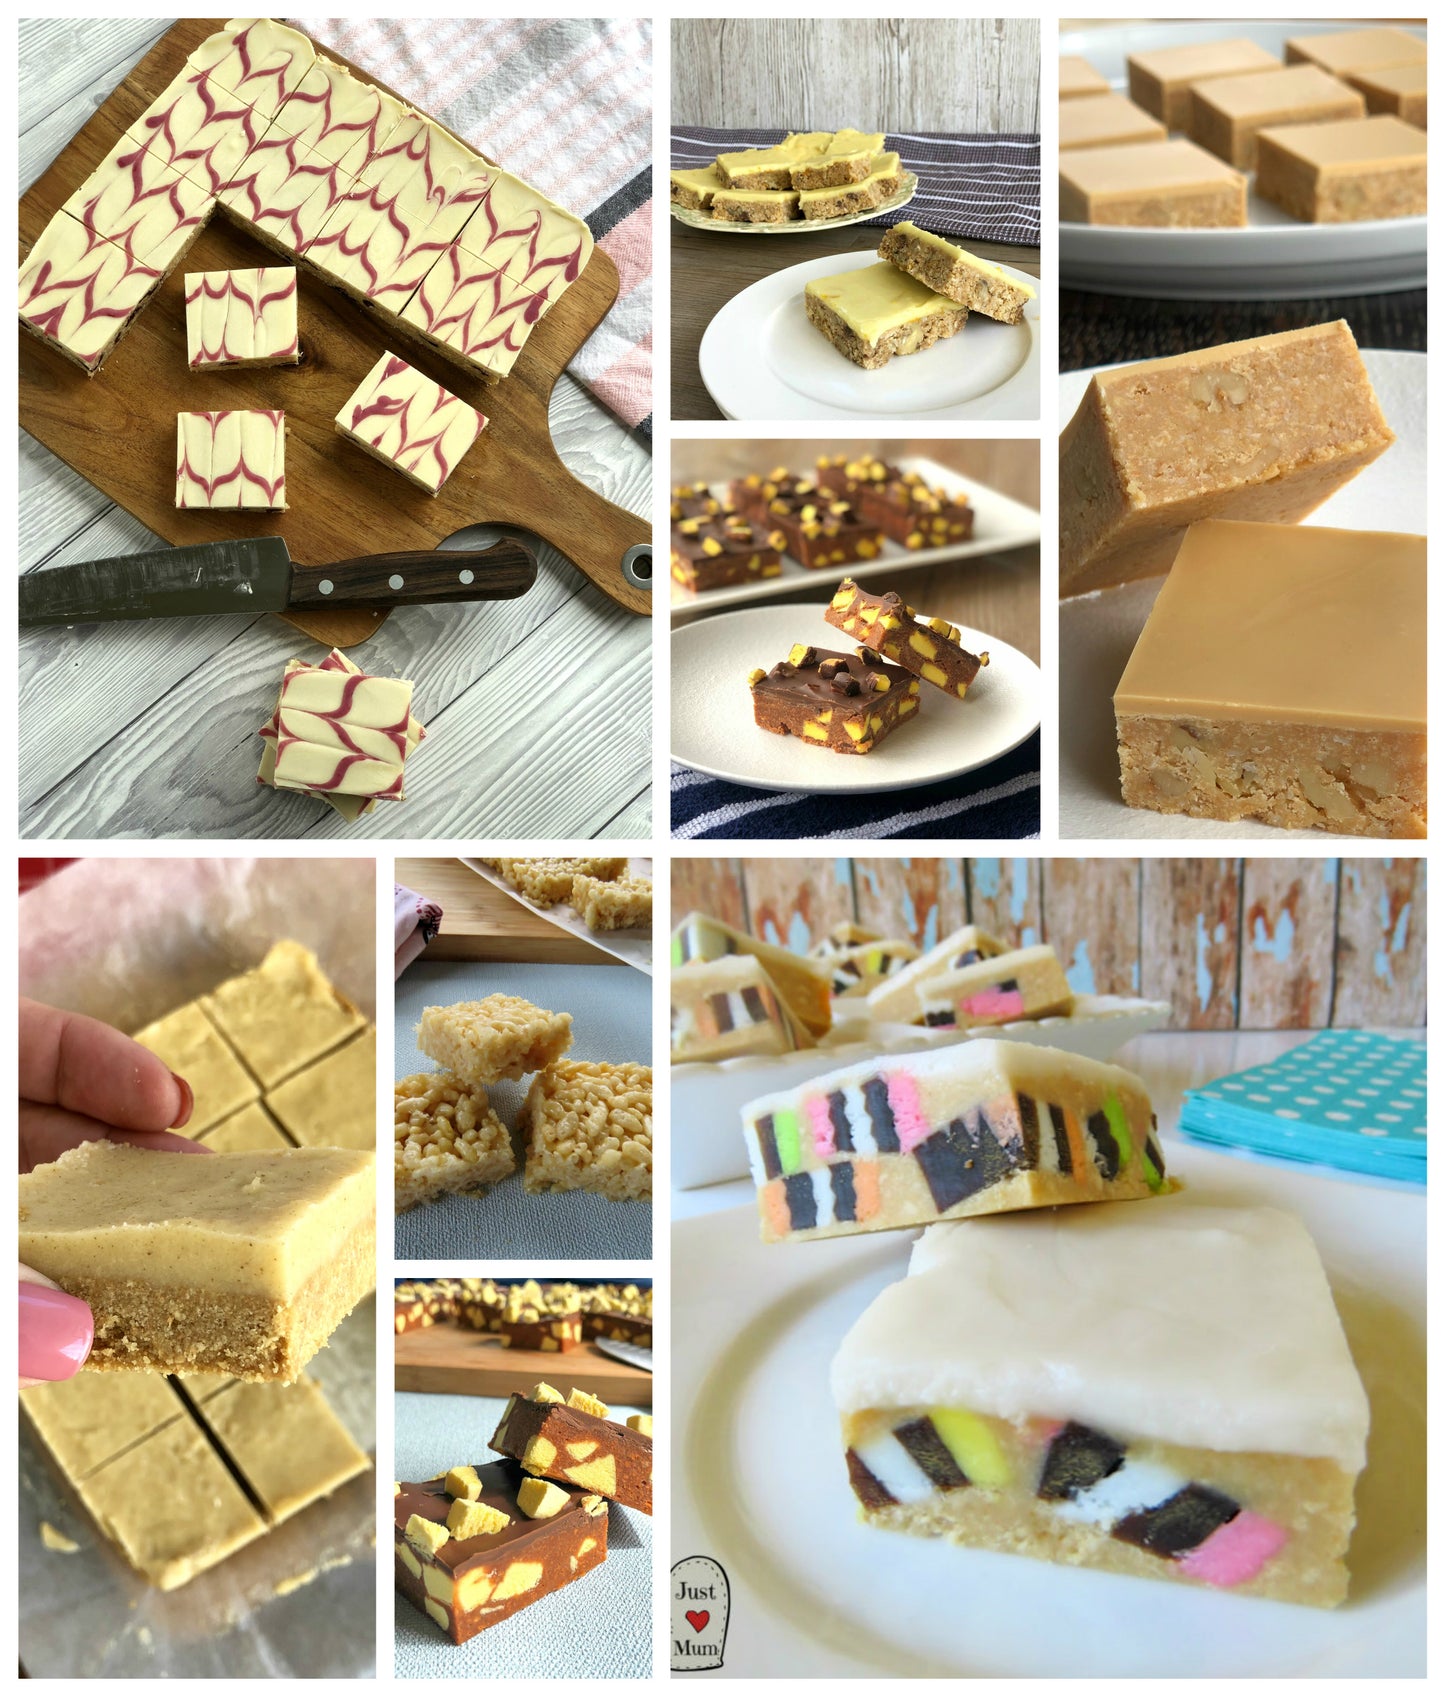 No Bake Slices - eBook - A selection of the best!